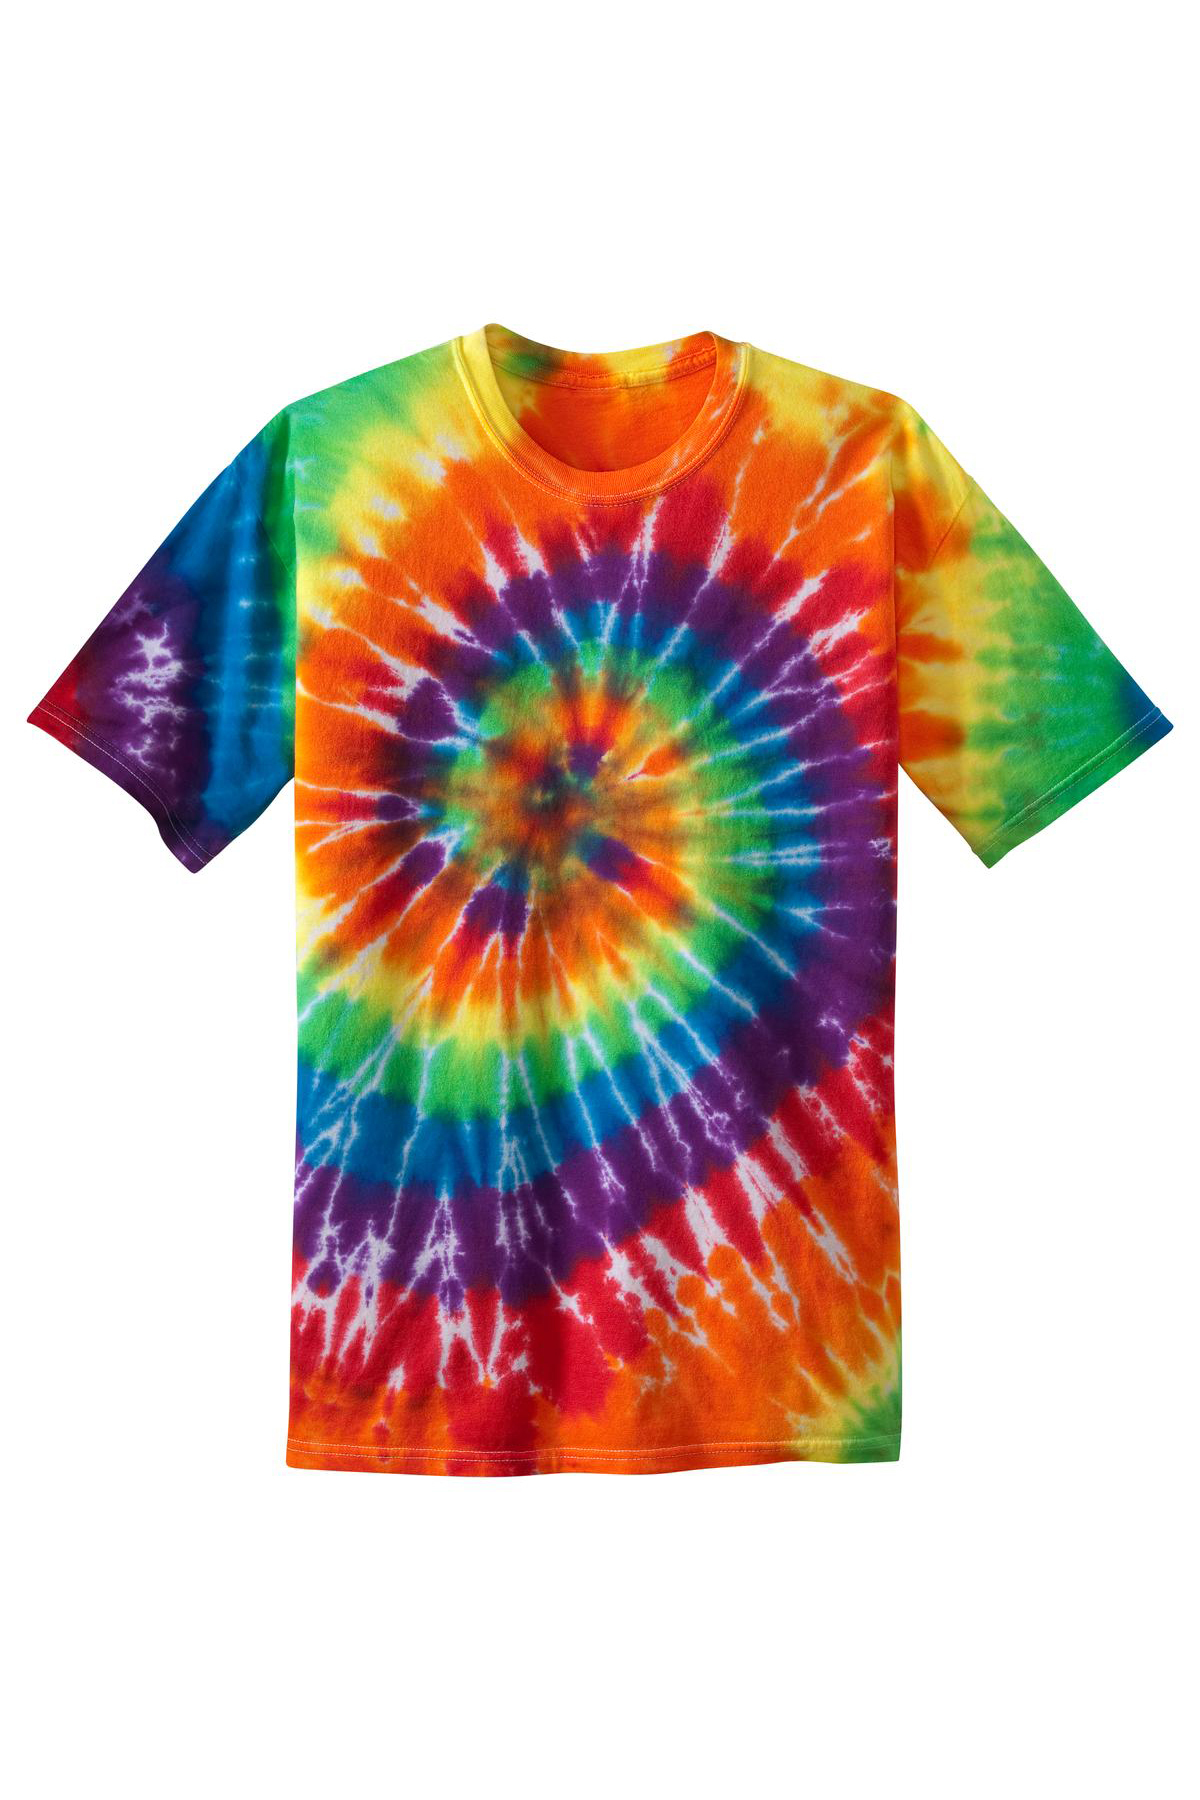 Youth small tie dye shirt